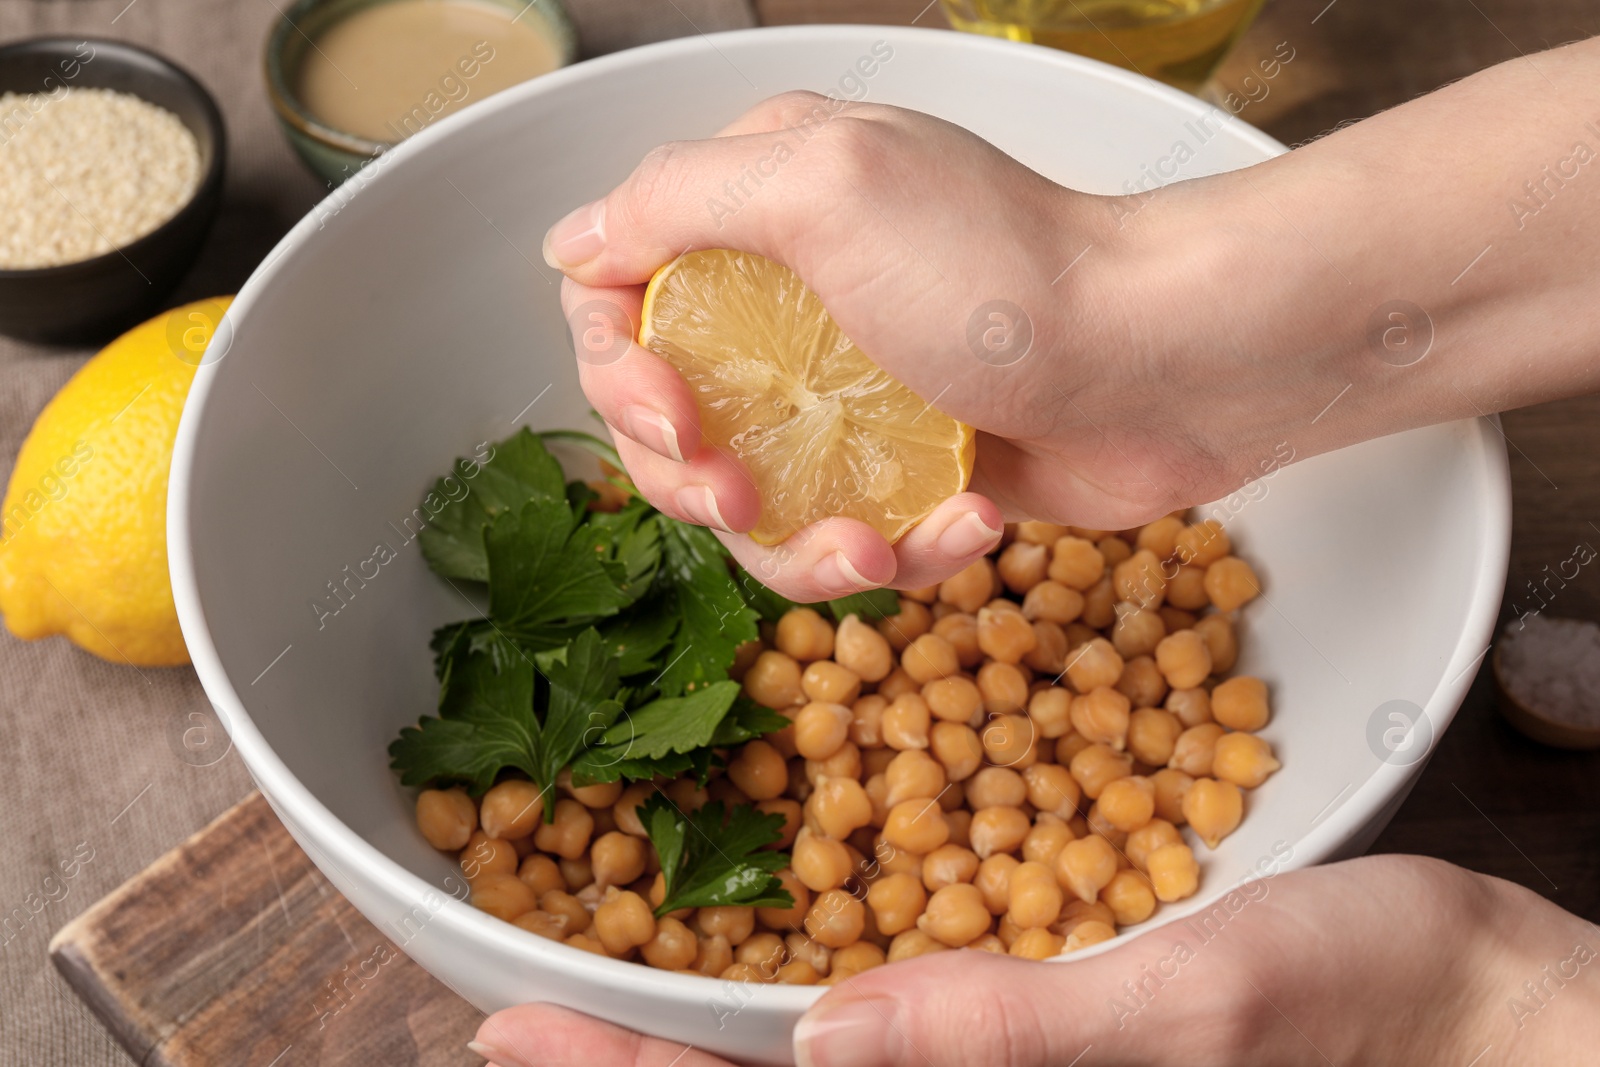 Photo of Woman squeezing lemon juice onto chickpeas at table, closeup. Cooking delicious hummus